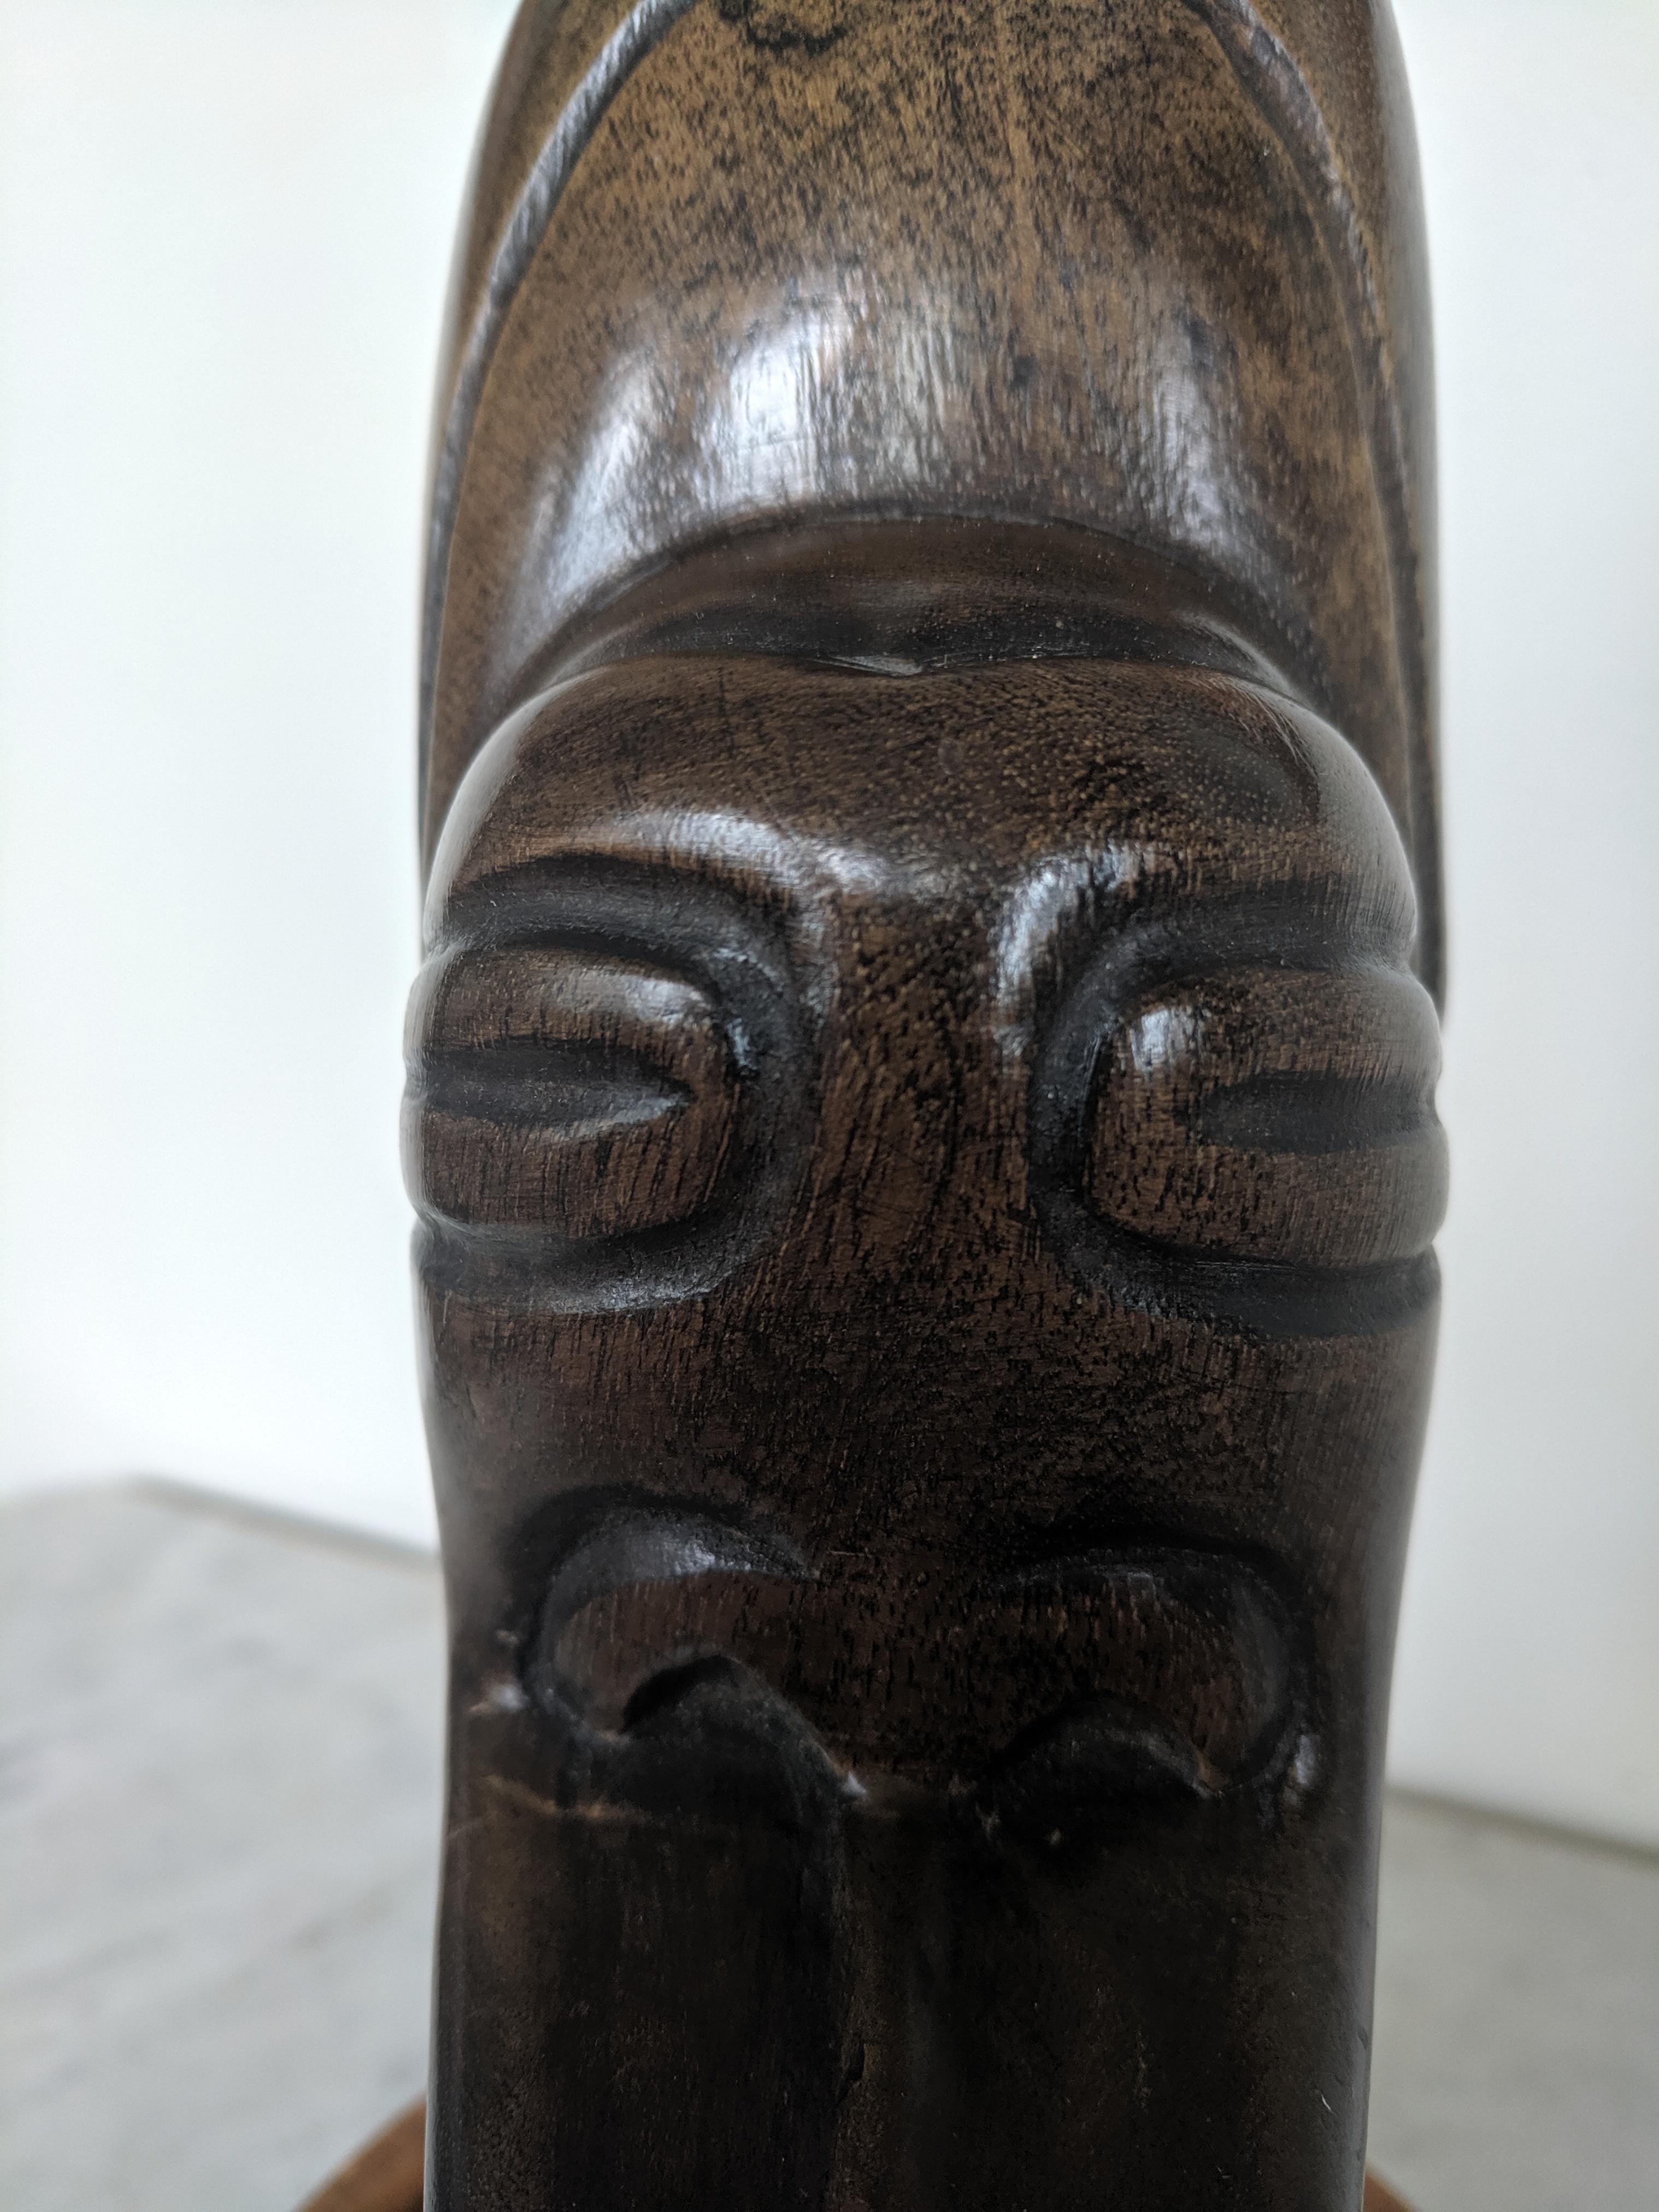 This sculptural head is made in Haiti from mahogany wood. The wood has a worn, dark brown patina. The carving is somewhat minimalistic, thus giving a modern twist to a tribal gesture. The head is signed underneath 